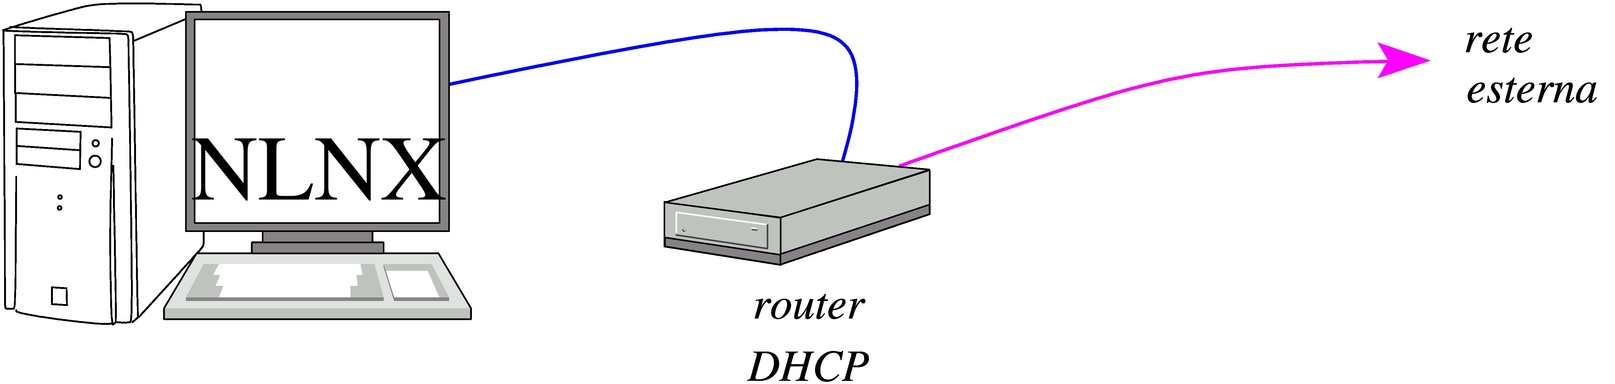 router e DHCP